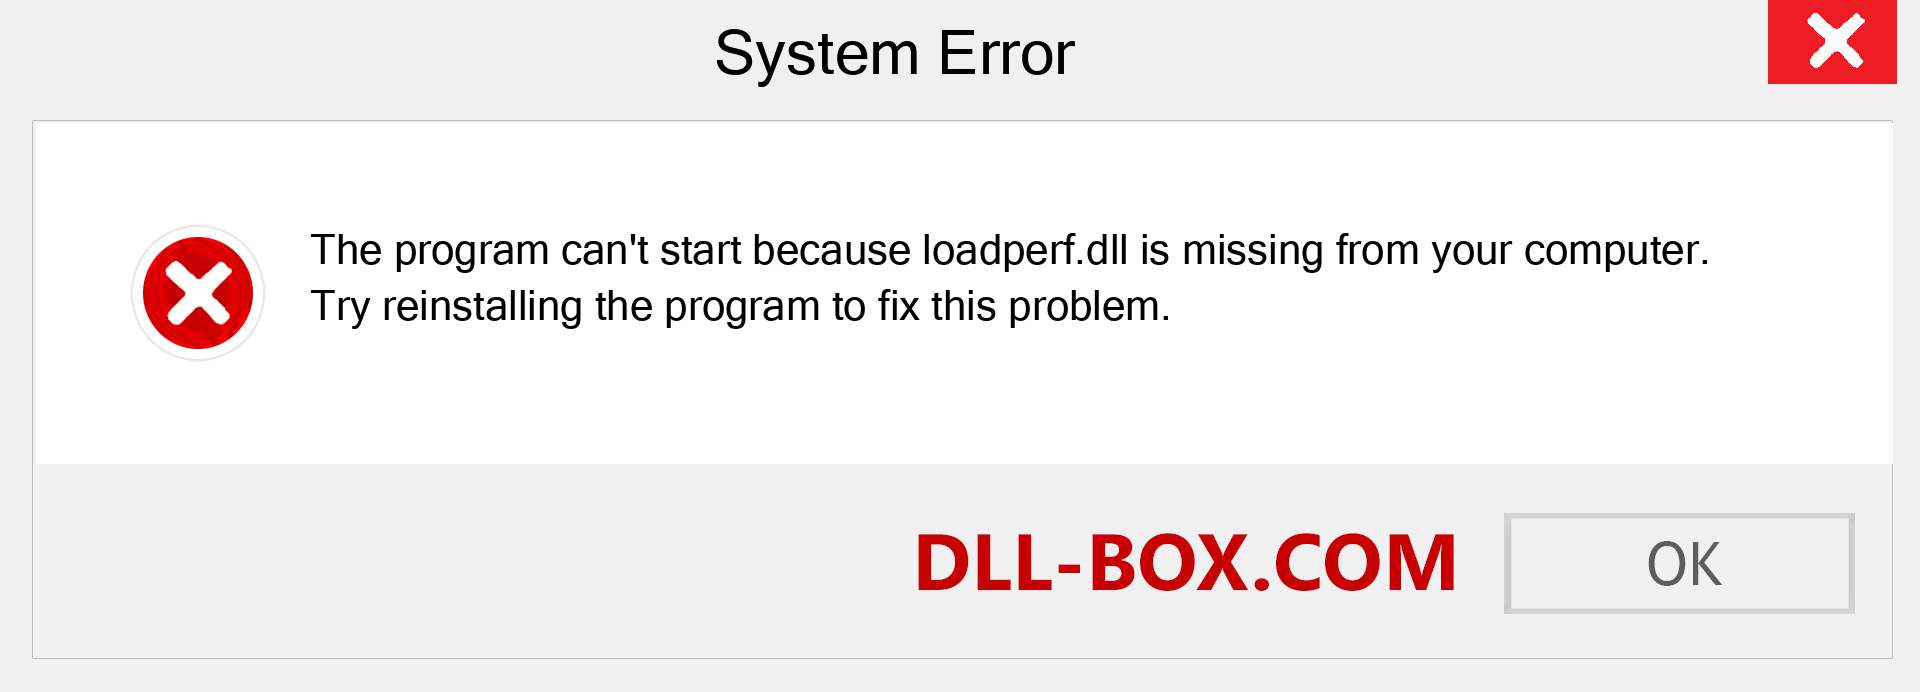  loadperf.dll file is missing?. Download for Windows 7, 8, 10 - Fix  loadperf dll Missing Error on Windows, photos, images